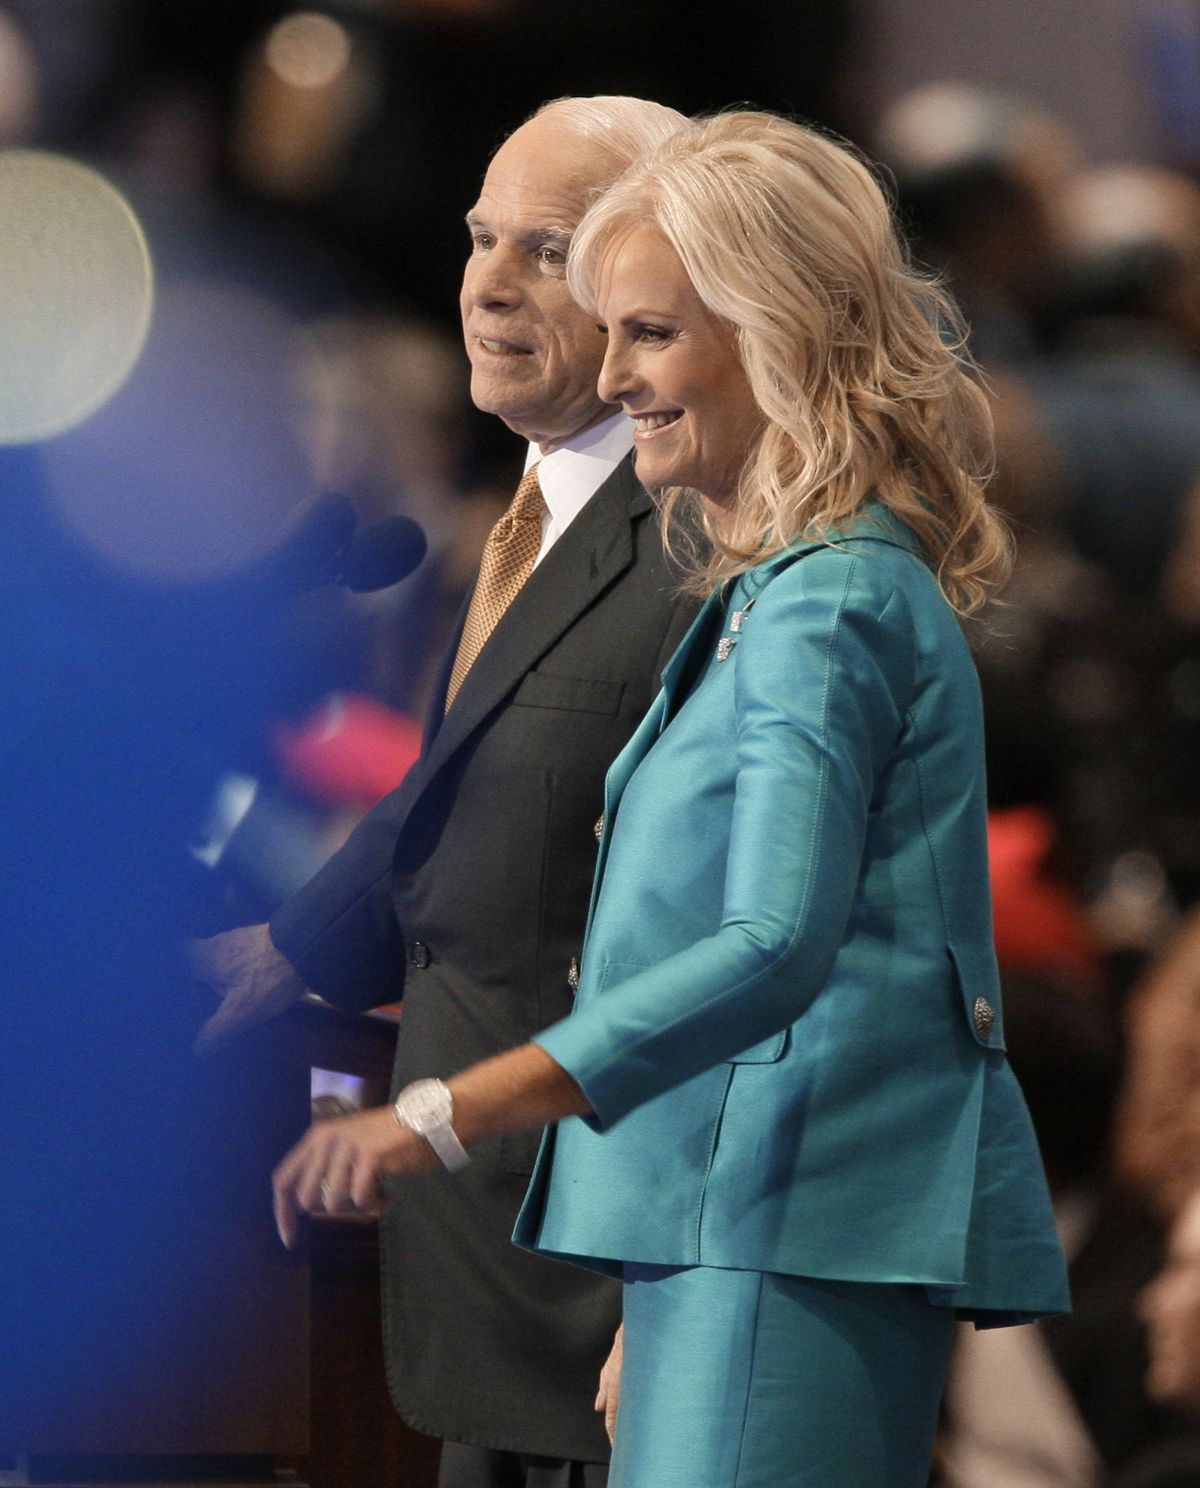 Republican presidential nominee John McCain is joined by his wife, Cindy, on stage after his acceptance speech Thursday at the Republican National Convention in St. Paul, Minn. Associated Press photos (Associated Press photos / The Spokesman-Review)